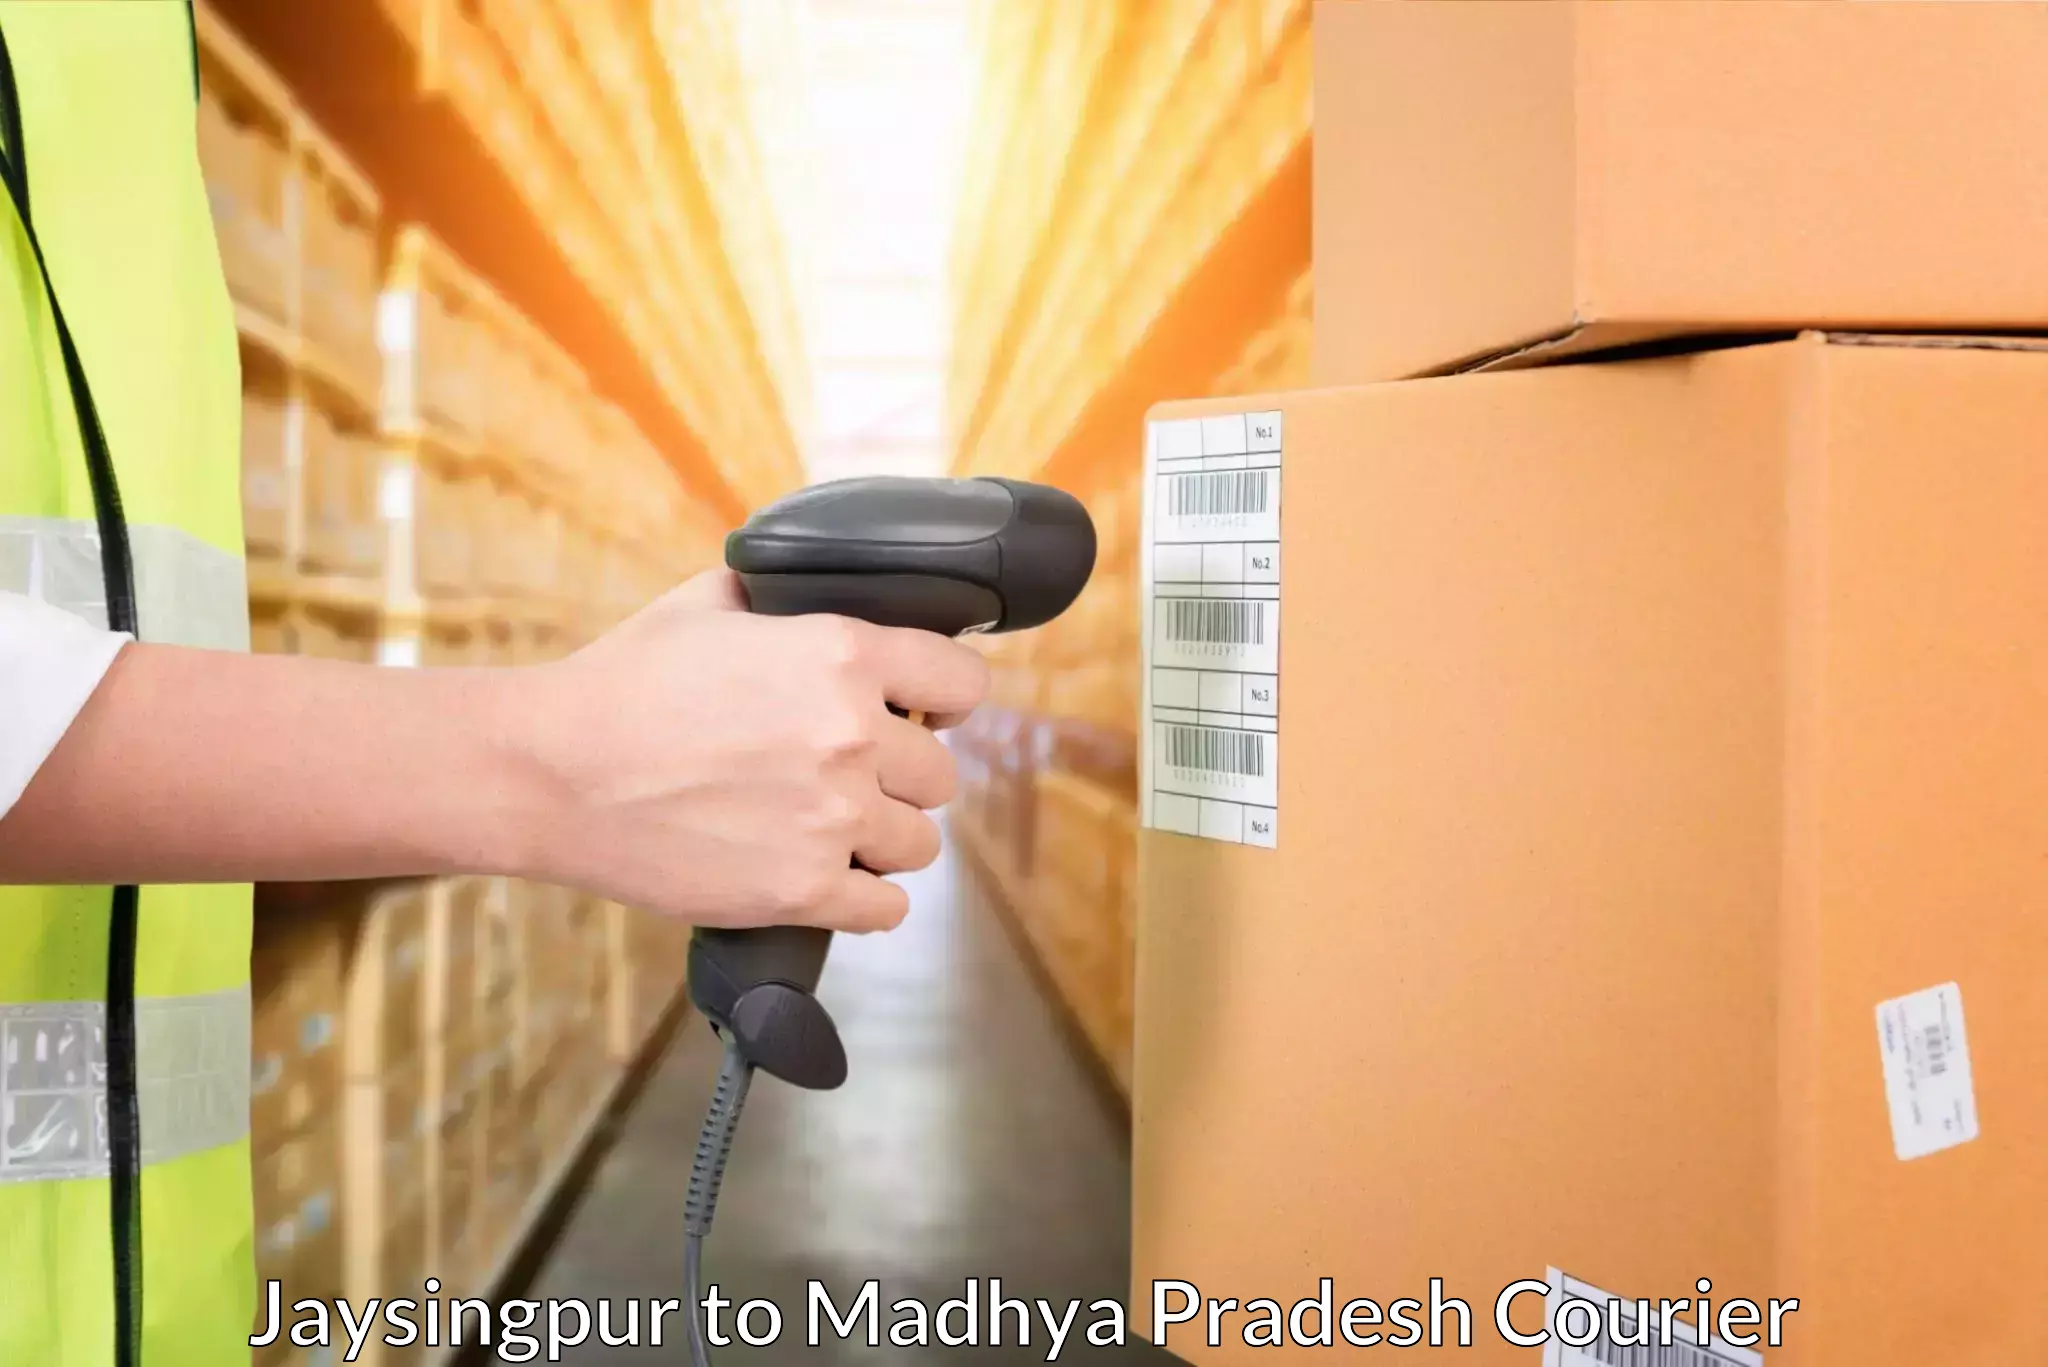 State-of-the-art courier technology in Jaysingpur to Alirajpur